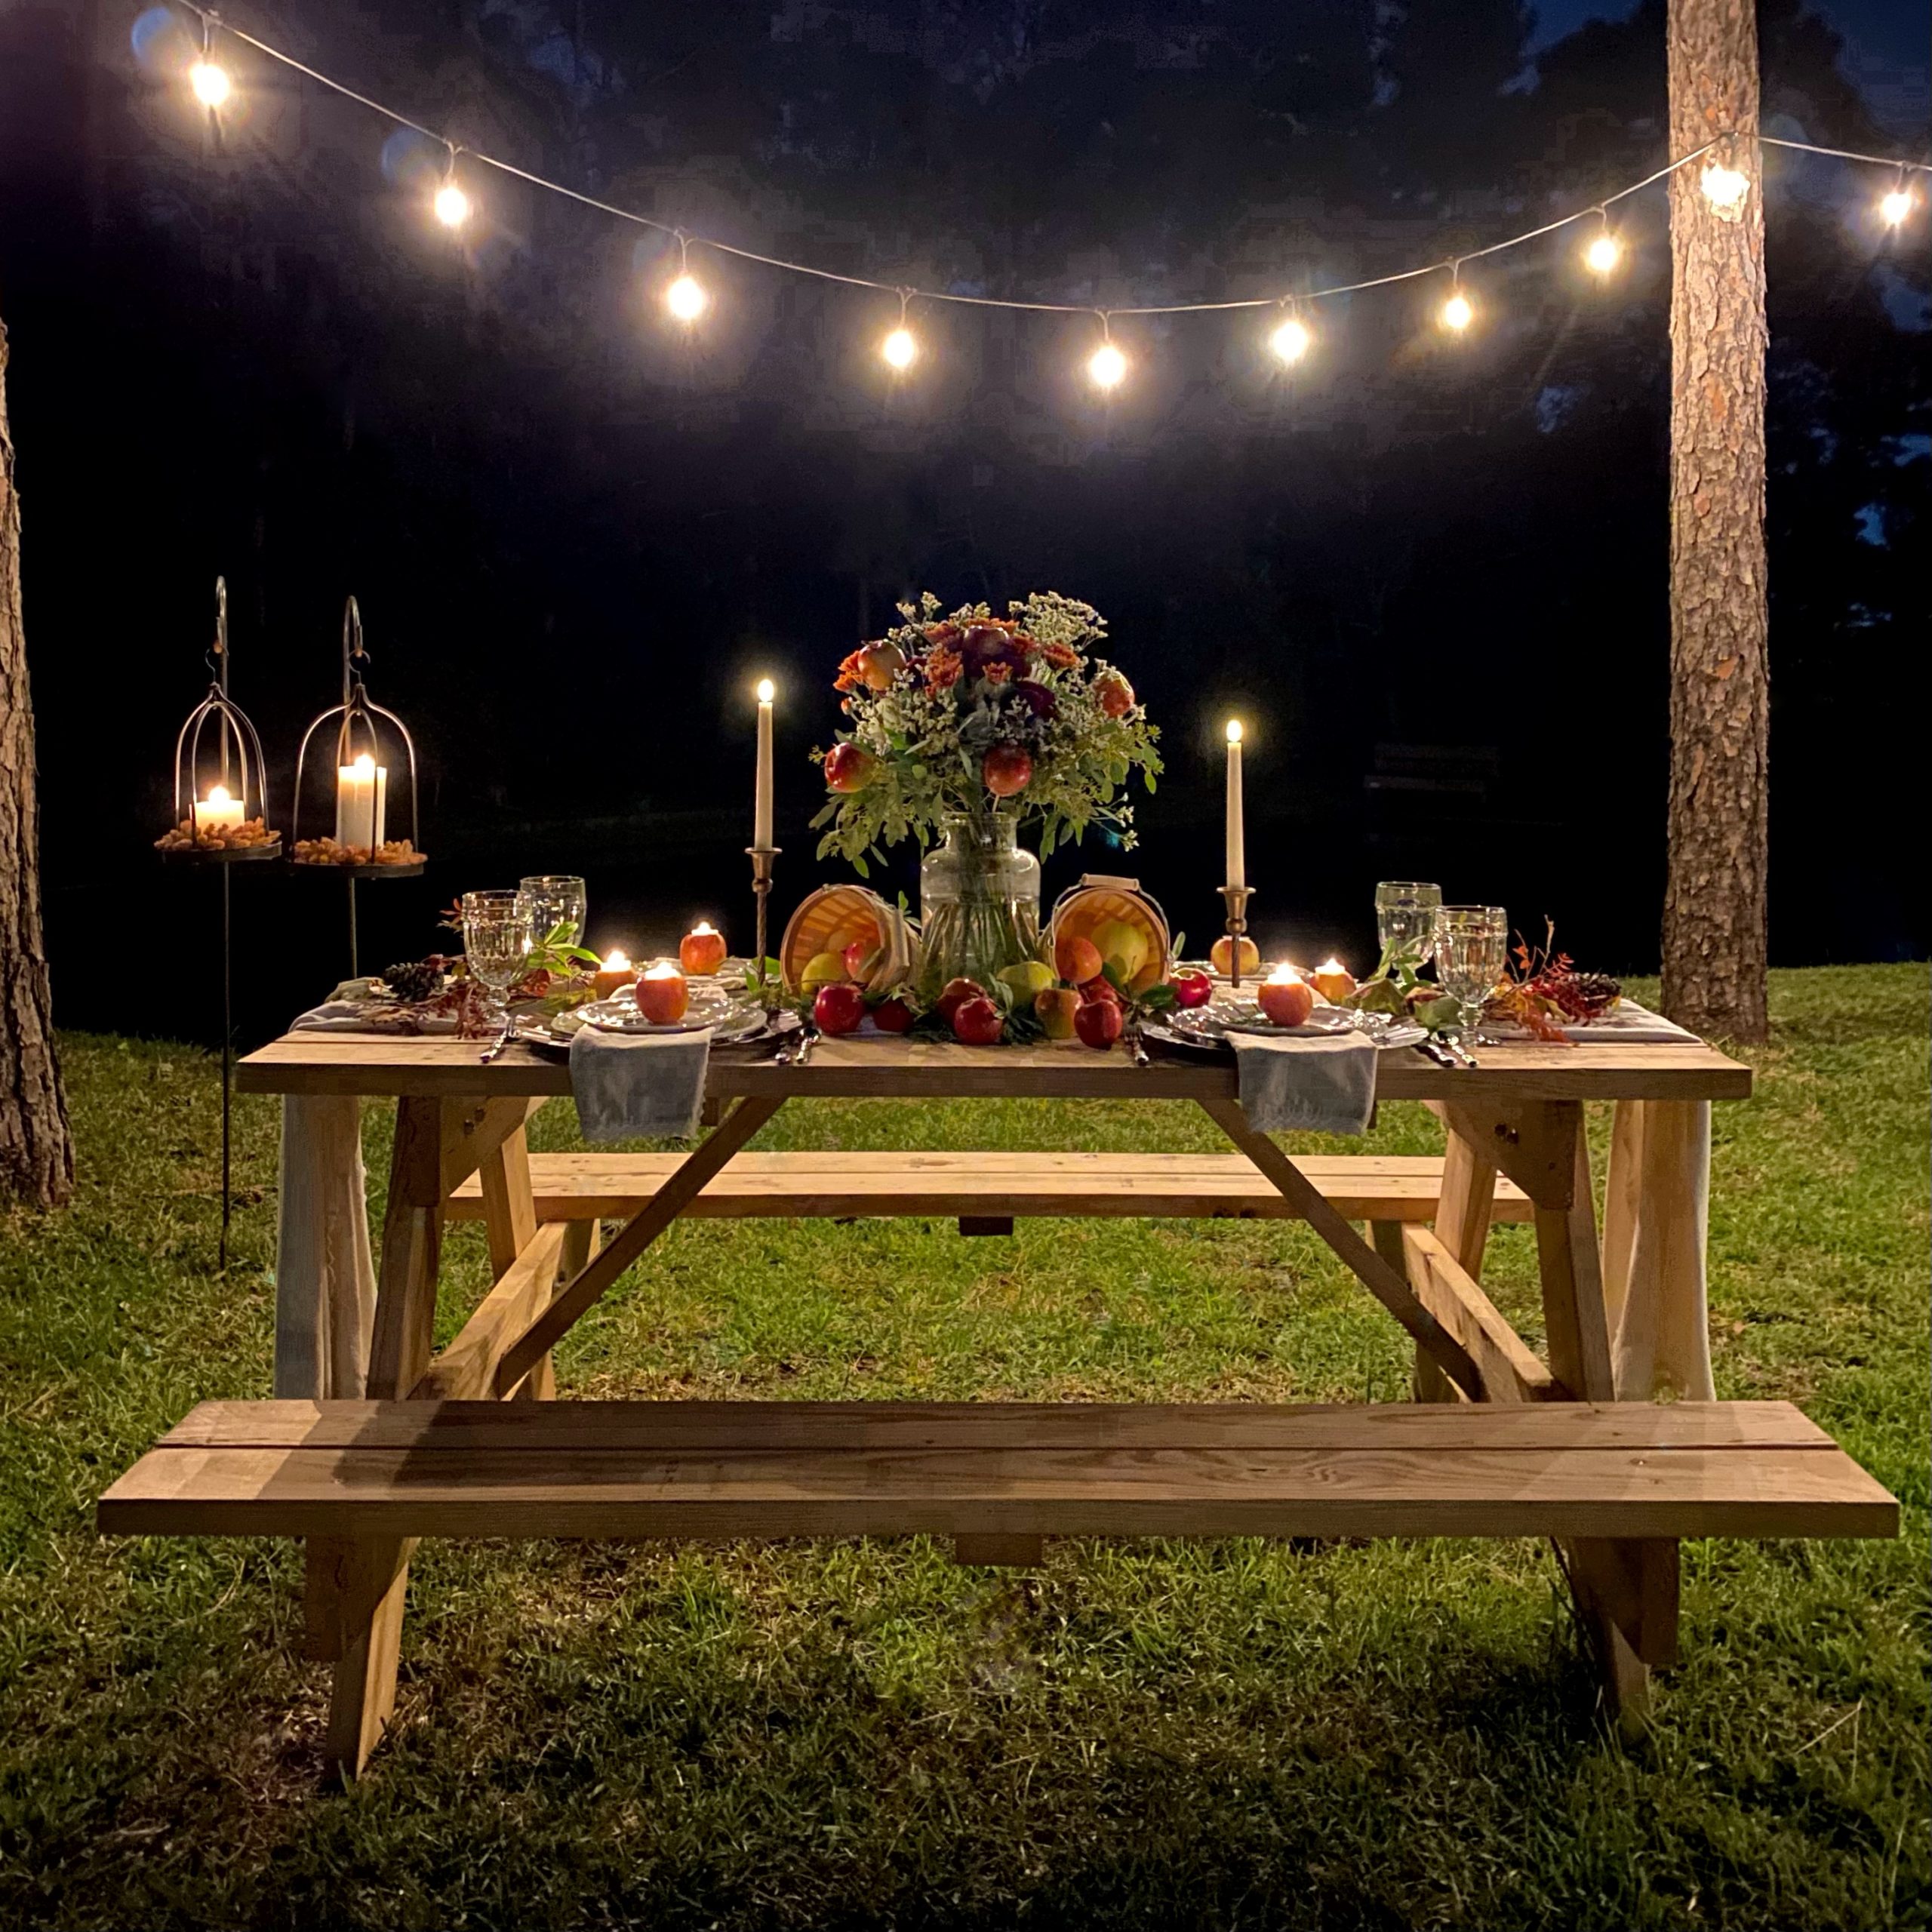 Apple harvest tablescape on a picnic table by a pond at night with white twinkle lights hanging from the trees. There is a floral arrangement, apple centerpiece, and apple votive candle holders at each place setting.